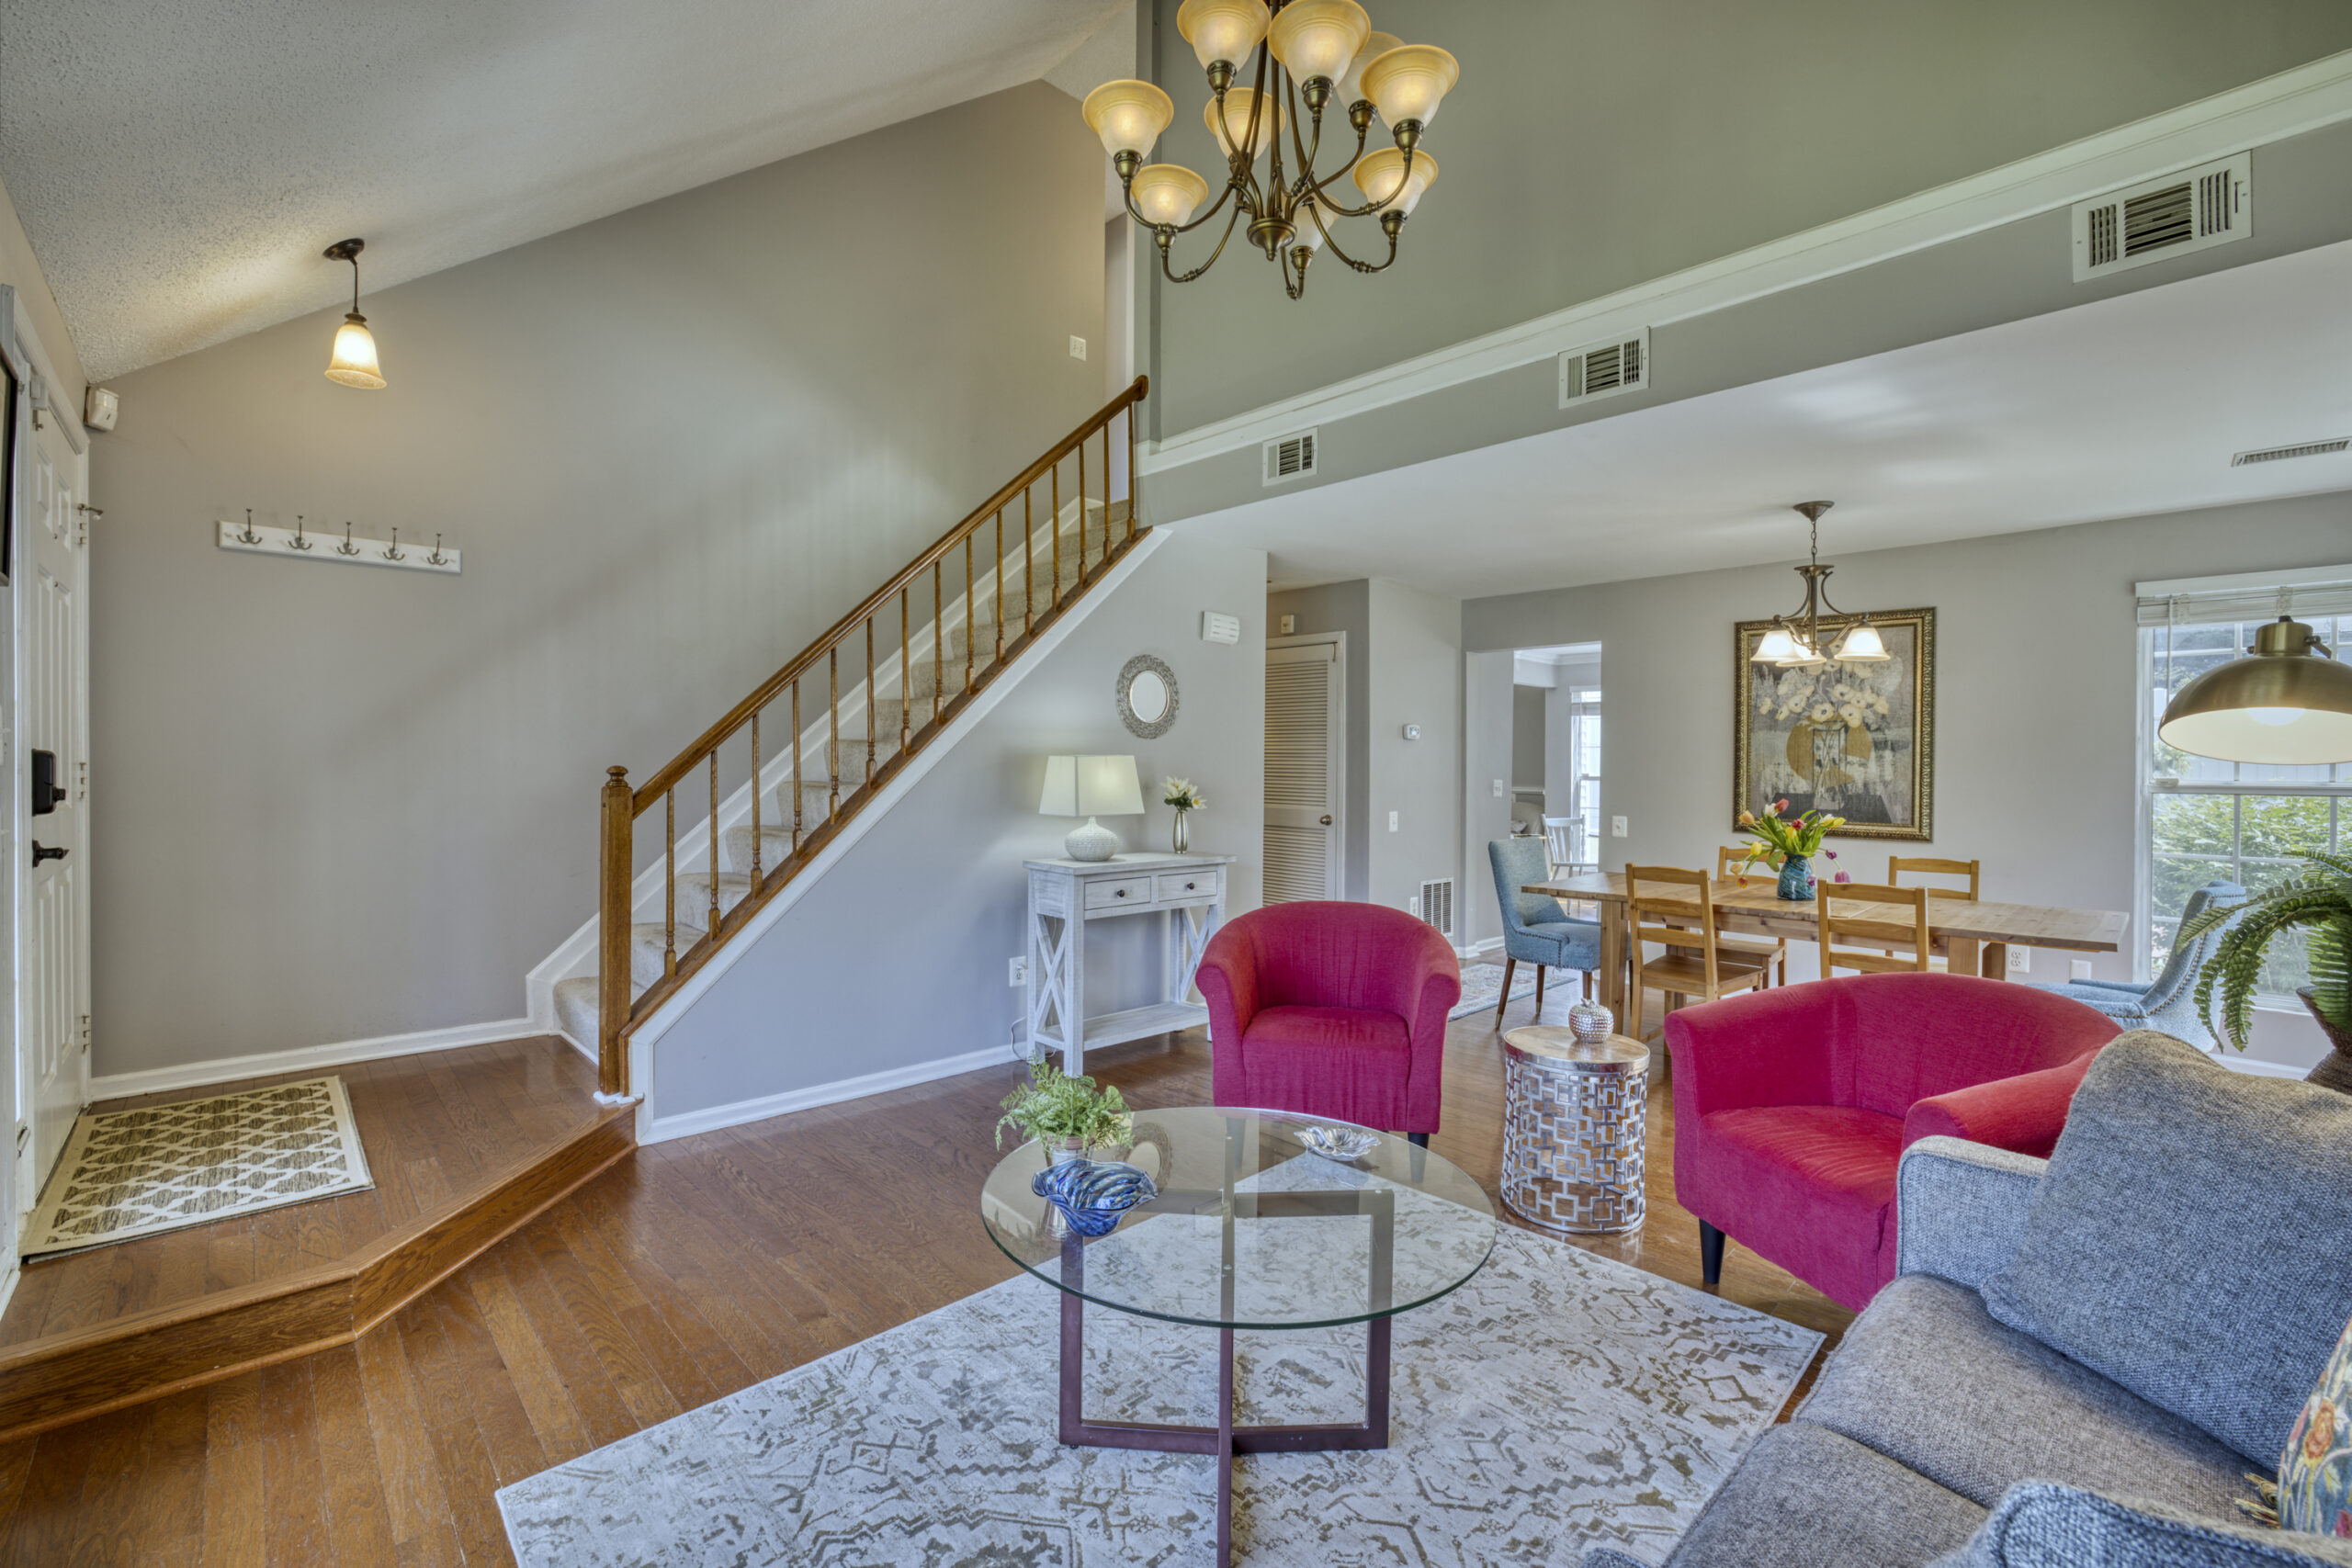 Professional interior photo of 12309 Stalwart Court - showing the front living room with vaulted ceiling, hardwood floors, stairs to the second floor and open dining room in the background